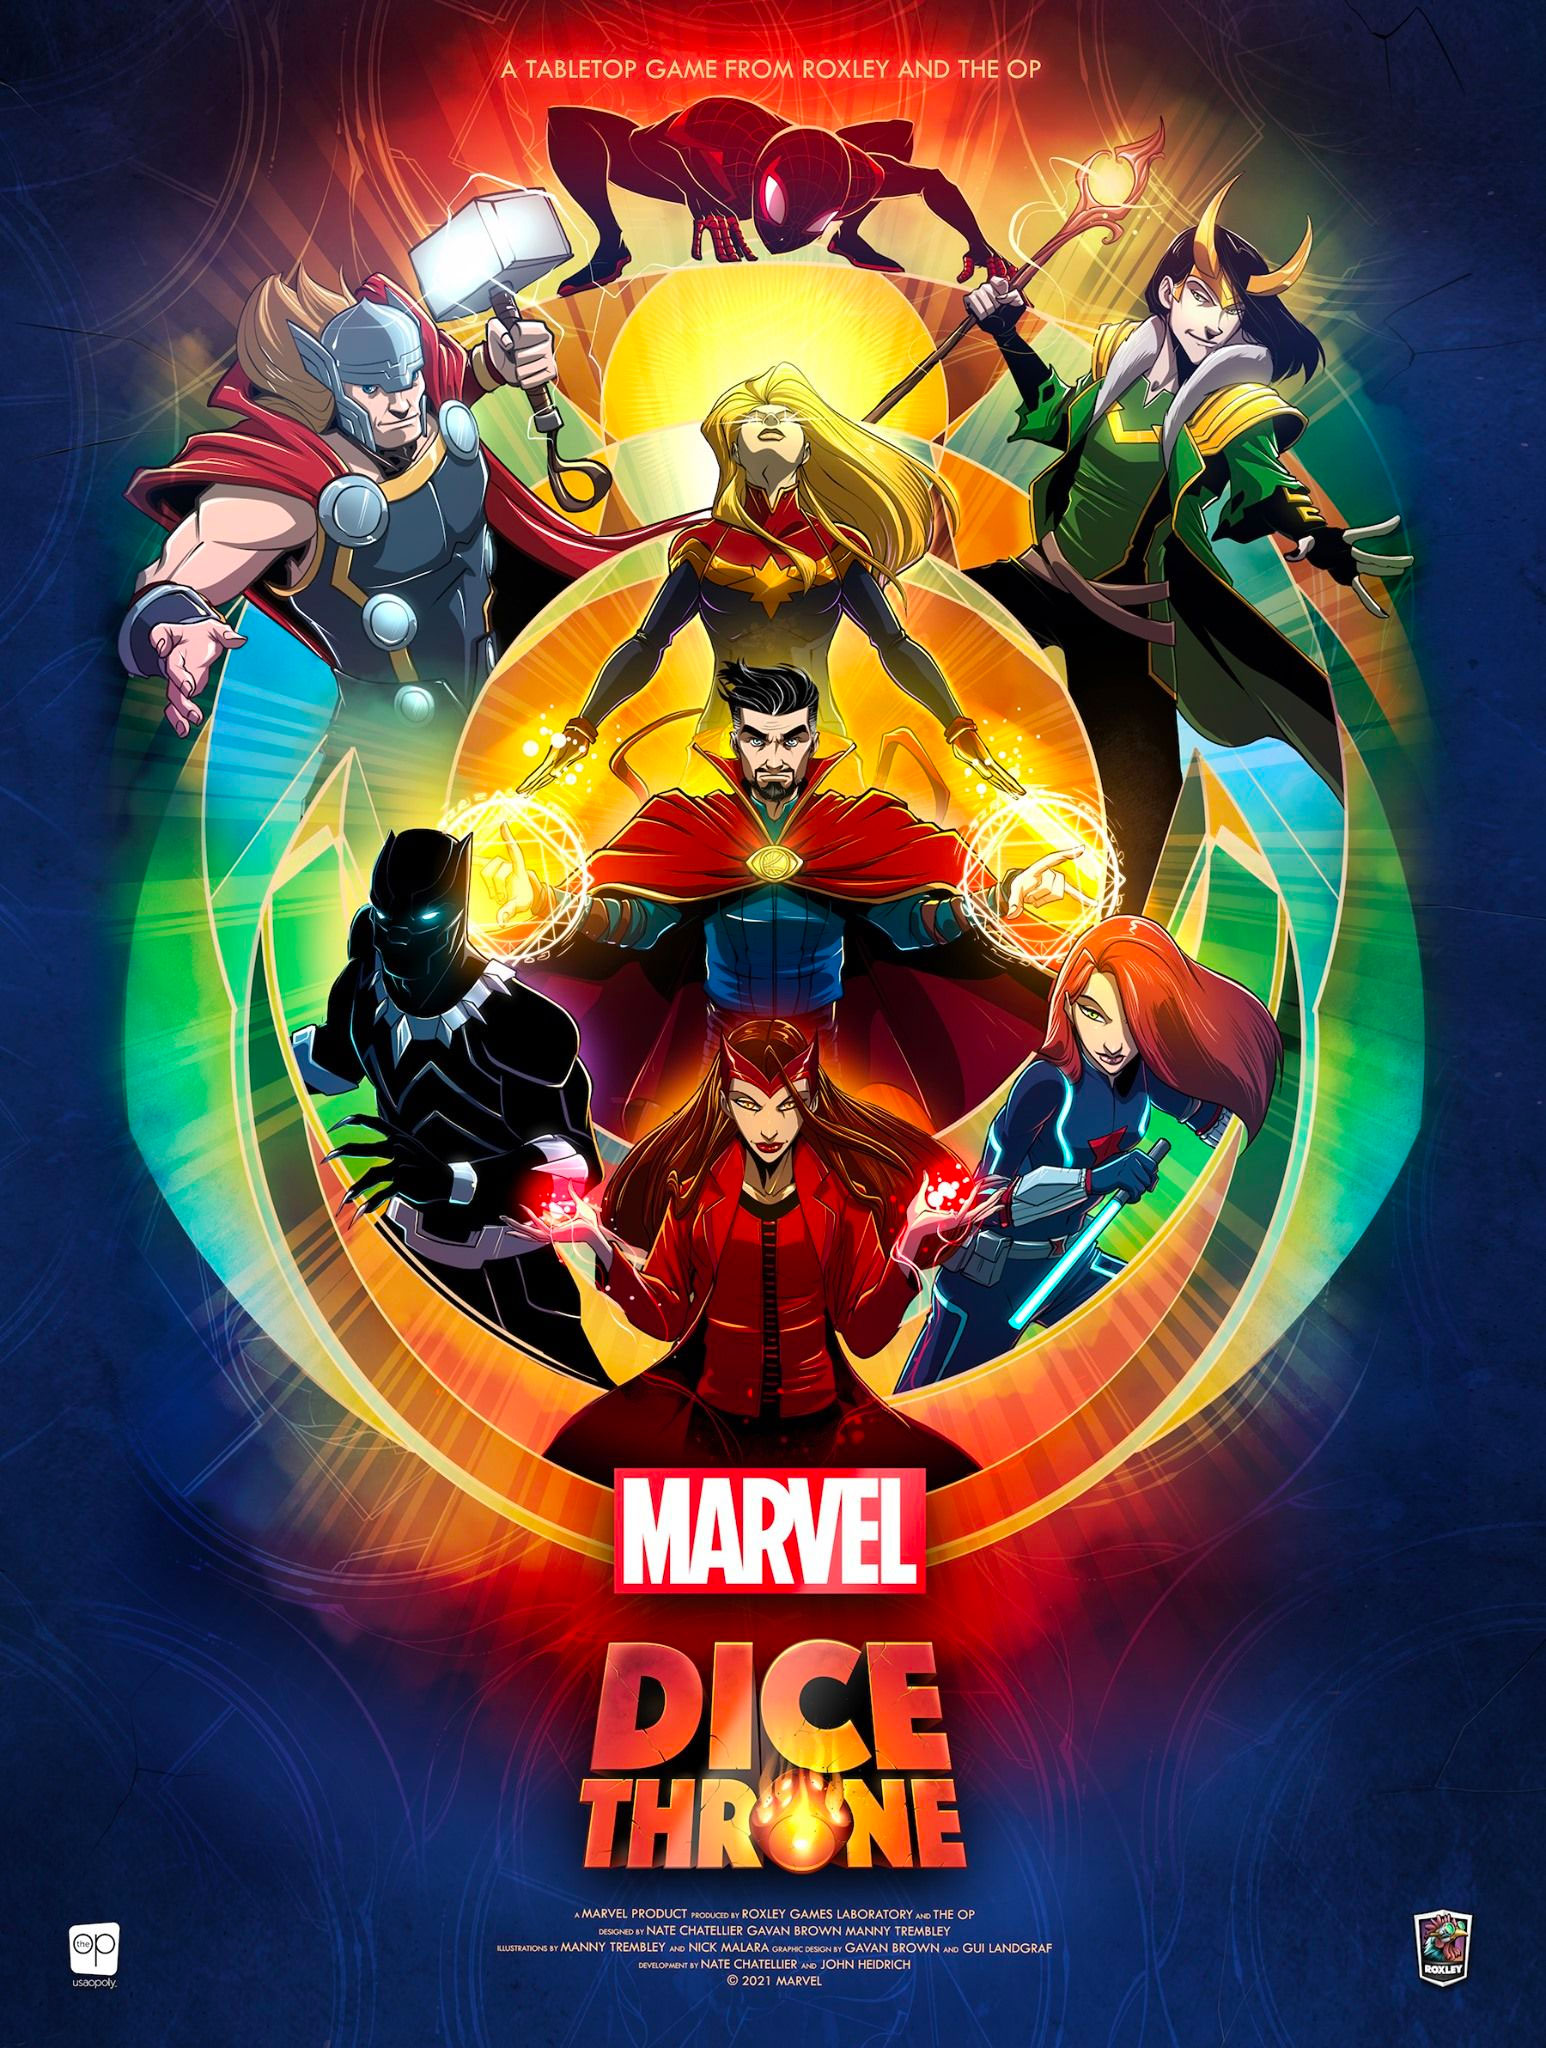 https://www.boardgamequest.com/wp-content/uploads/2022/10/Marvel-Dice-Throne.jpg